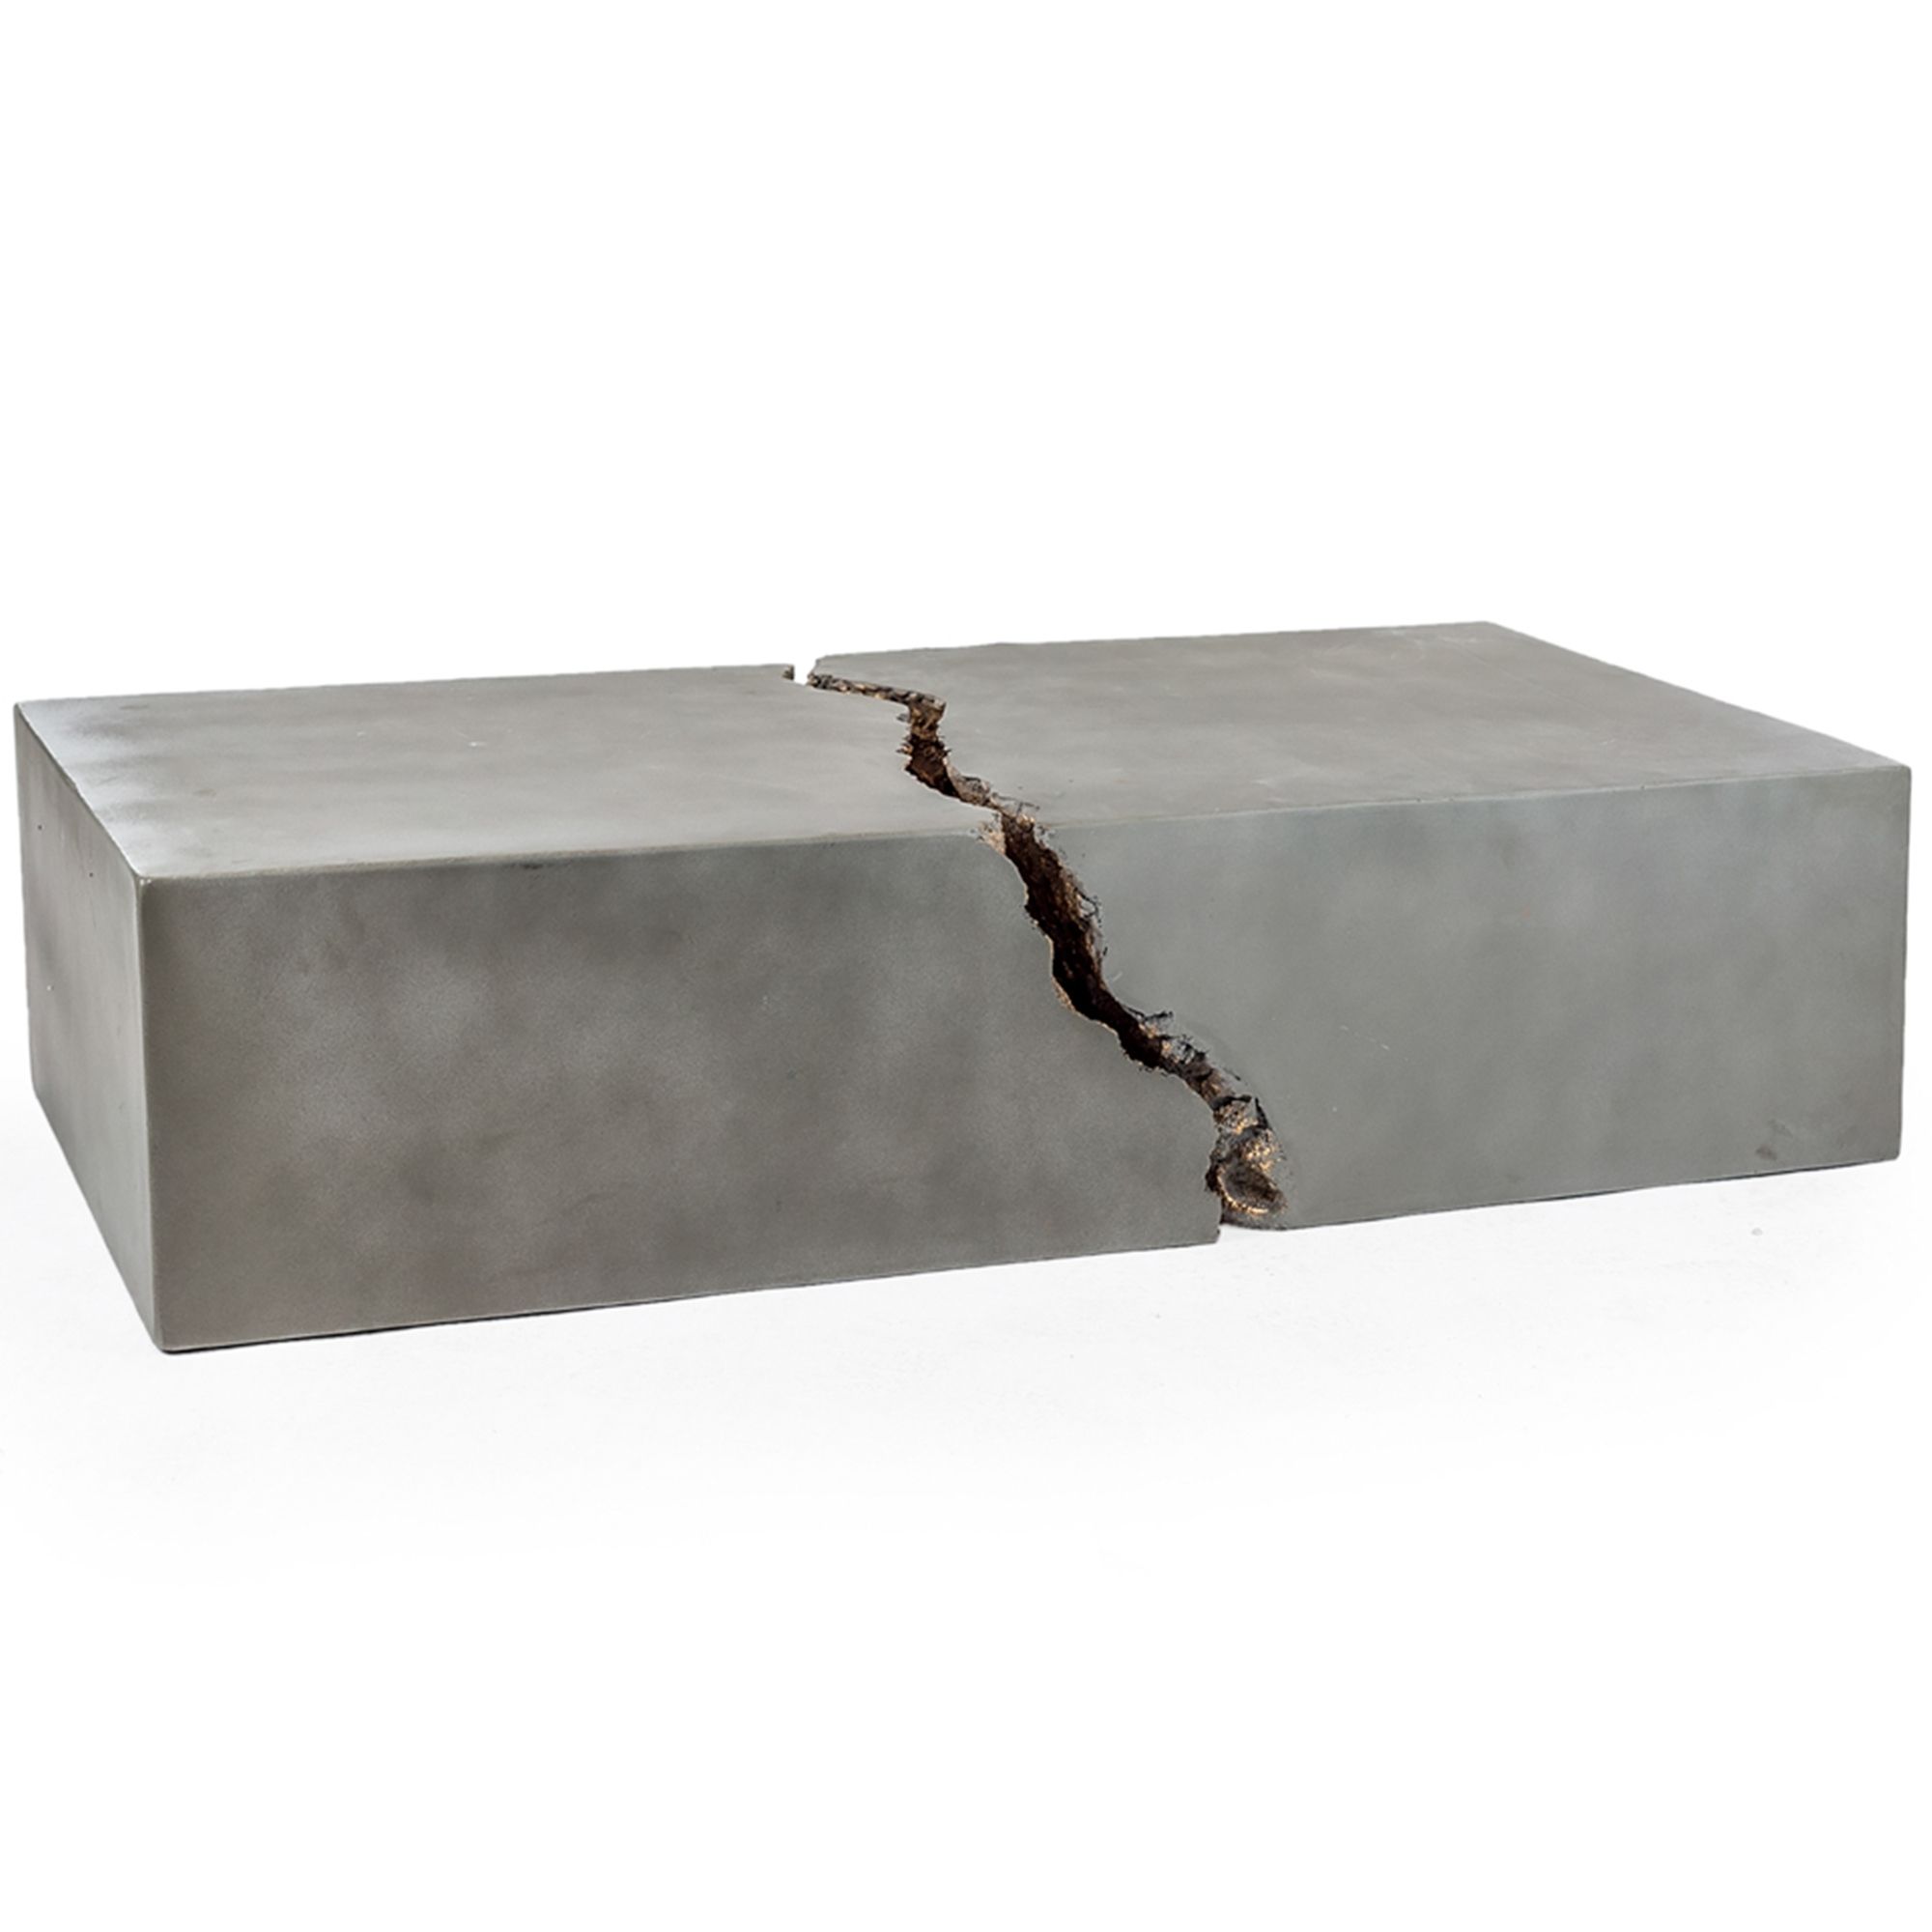 Concrete Core 2 Piece Coffee Table | Modern Furniture Online With Regard To 2 Piece Coffee Tables (View 18 of 20)